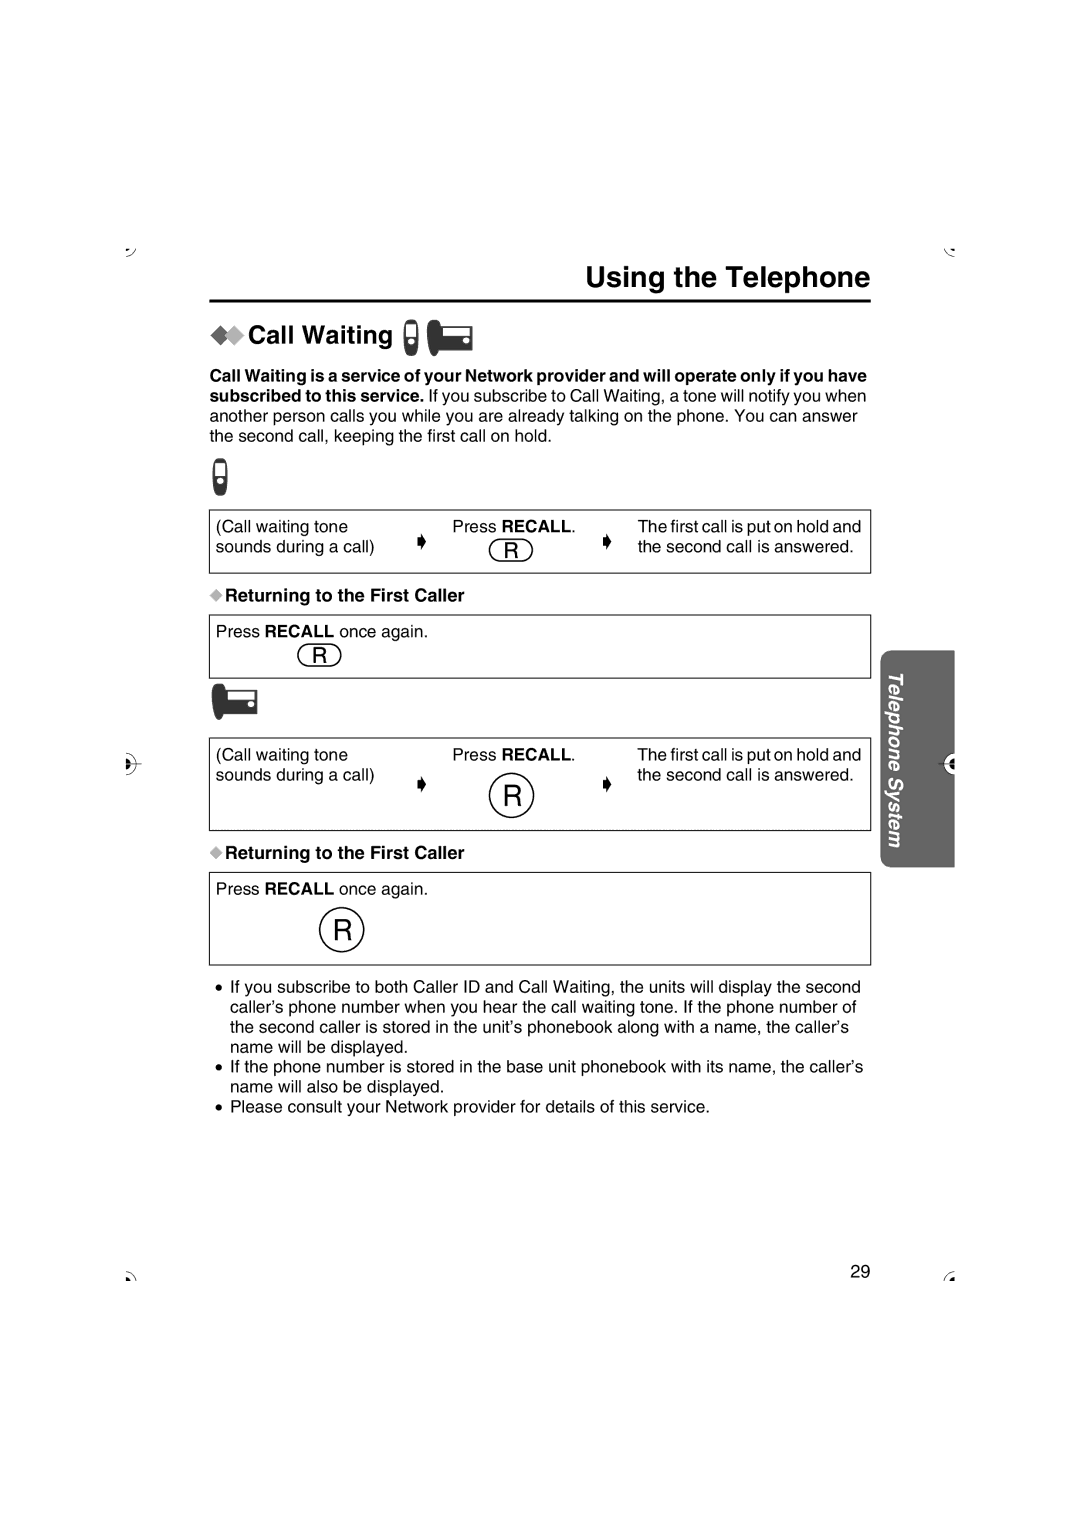 Panasonic KX-TCD535HK operating instructions Call Waiting, Returning to the First Caller 